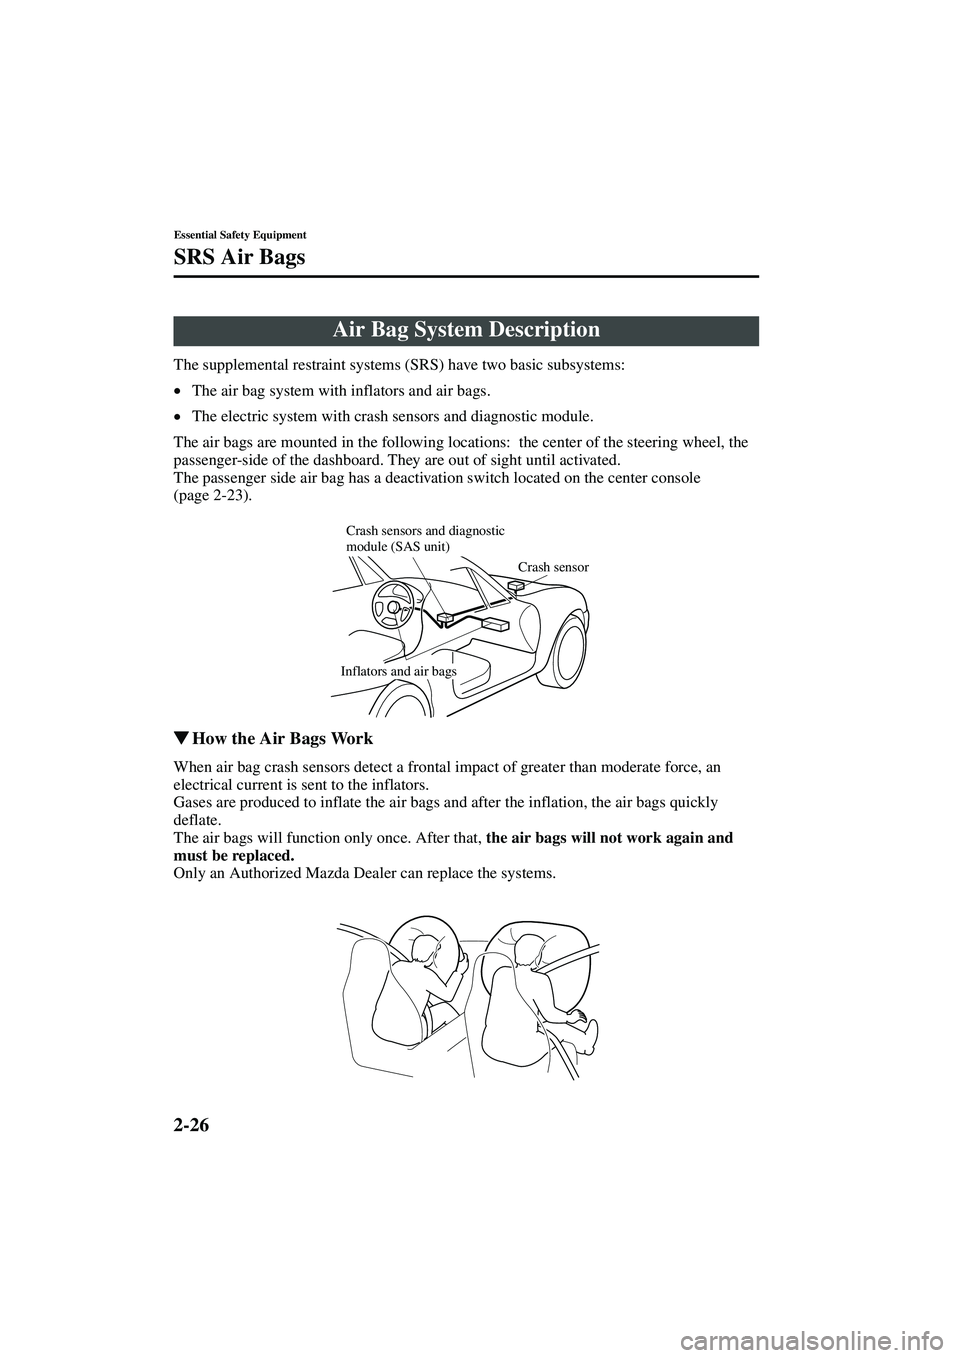 MAZDA MODEL MX-5 MIATA 2003  Owners Manual 2-26
Essential Safety Equipment
SRS Air Bags
Form No. 8R09-EA-02G
The supplemental restraint systems (SRS) have two basic subsystems:
•The air bag system with inflators and air bags.
• The electri